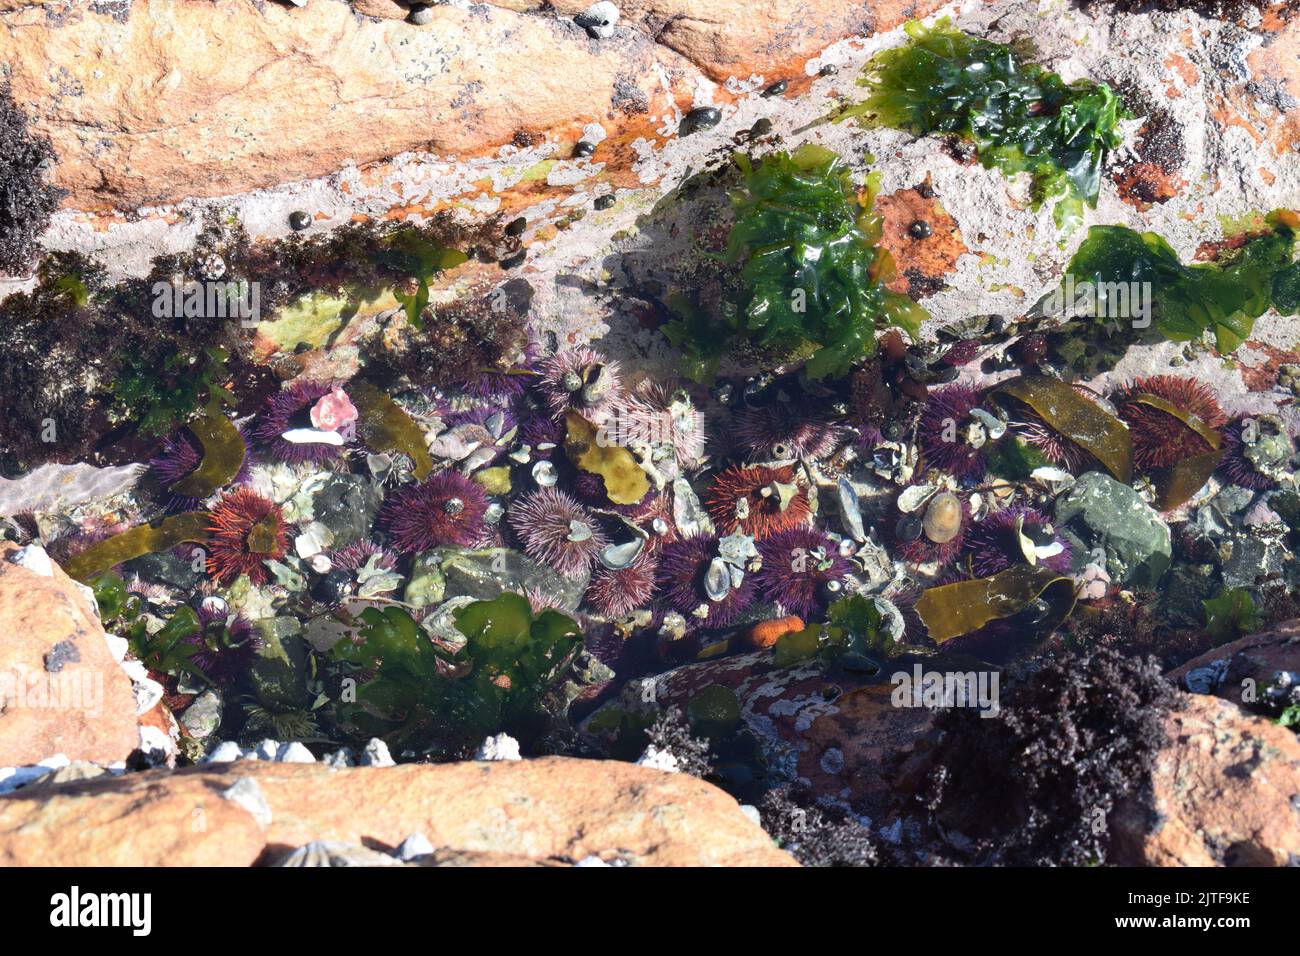 A view of the marine life at a tidal pool, showing the colorful creatures and plants without distortion from the water. Stock Photo